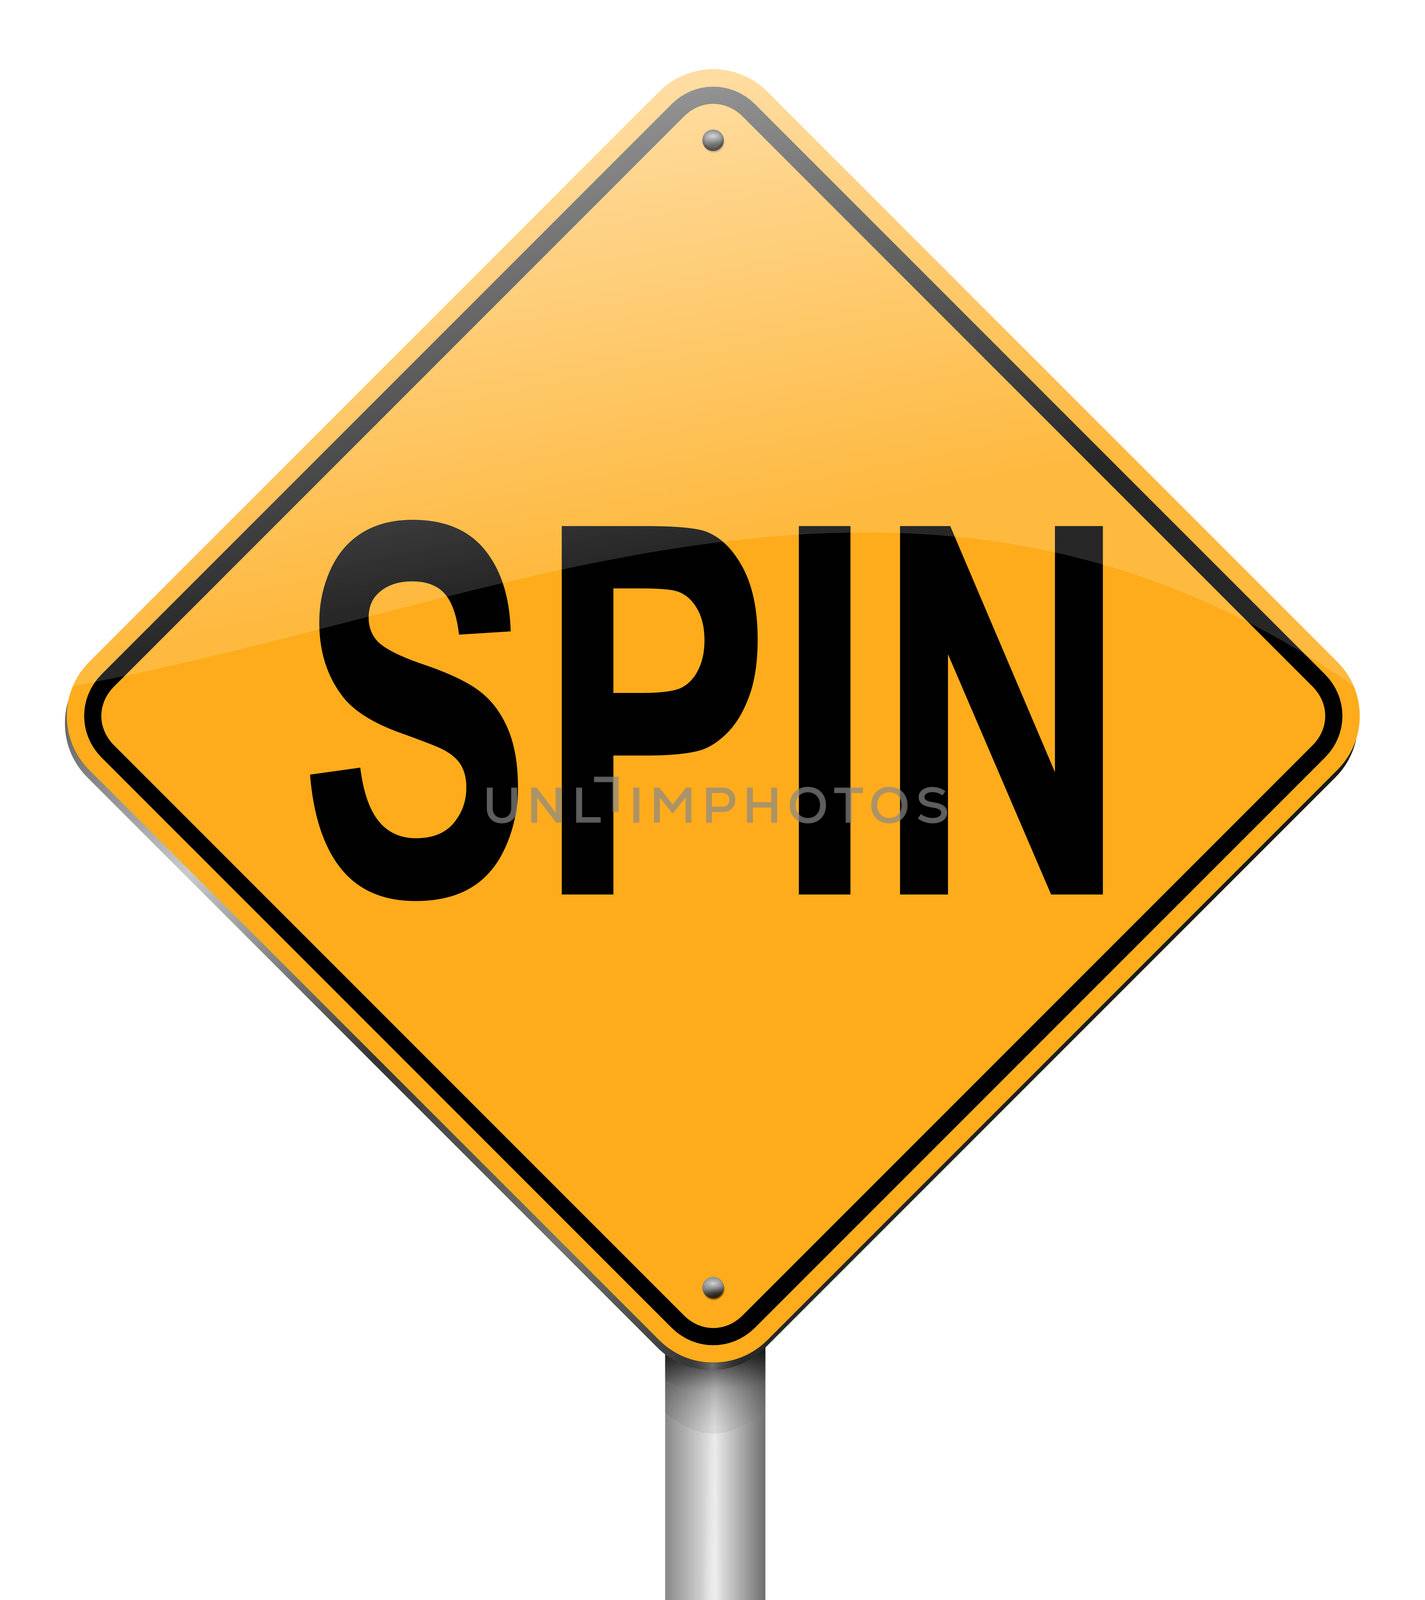 Illustration depicting a roadsign with a spin concept. White background.